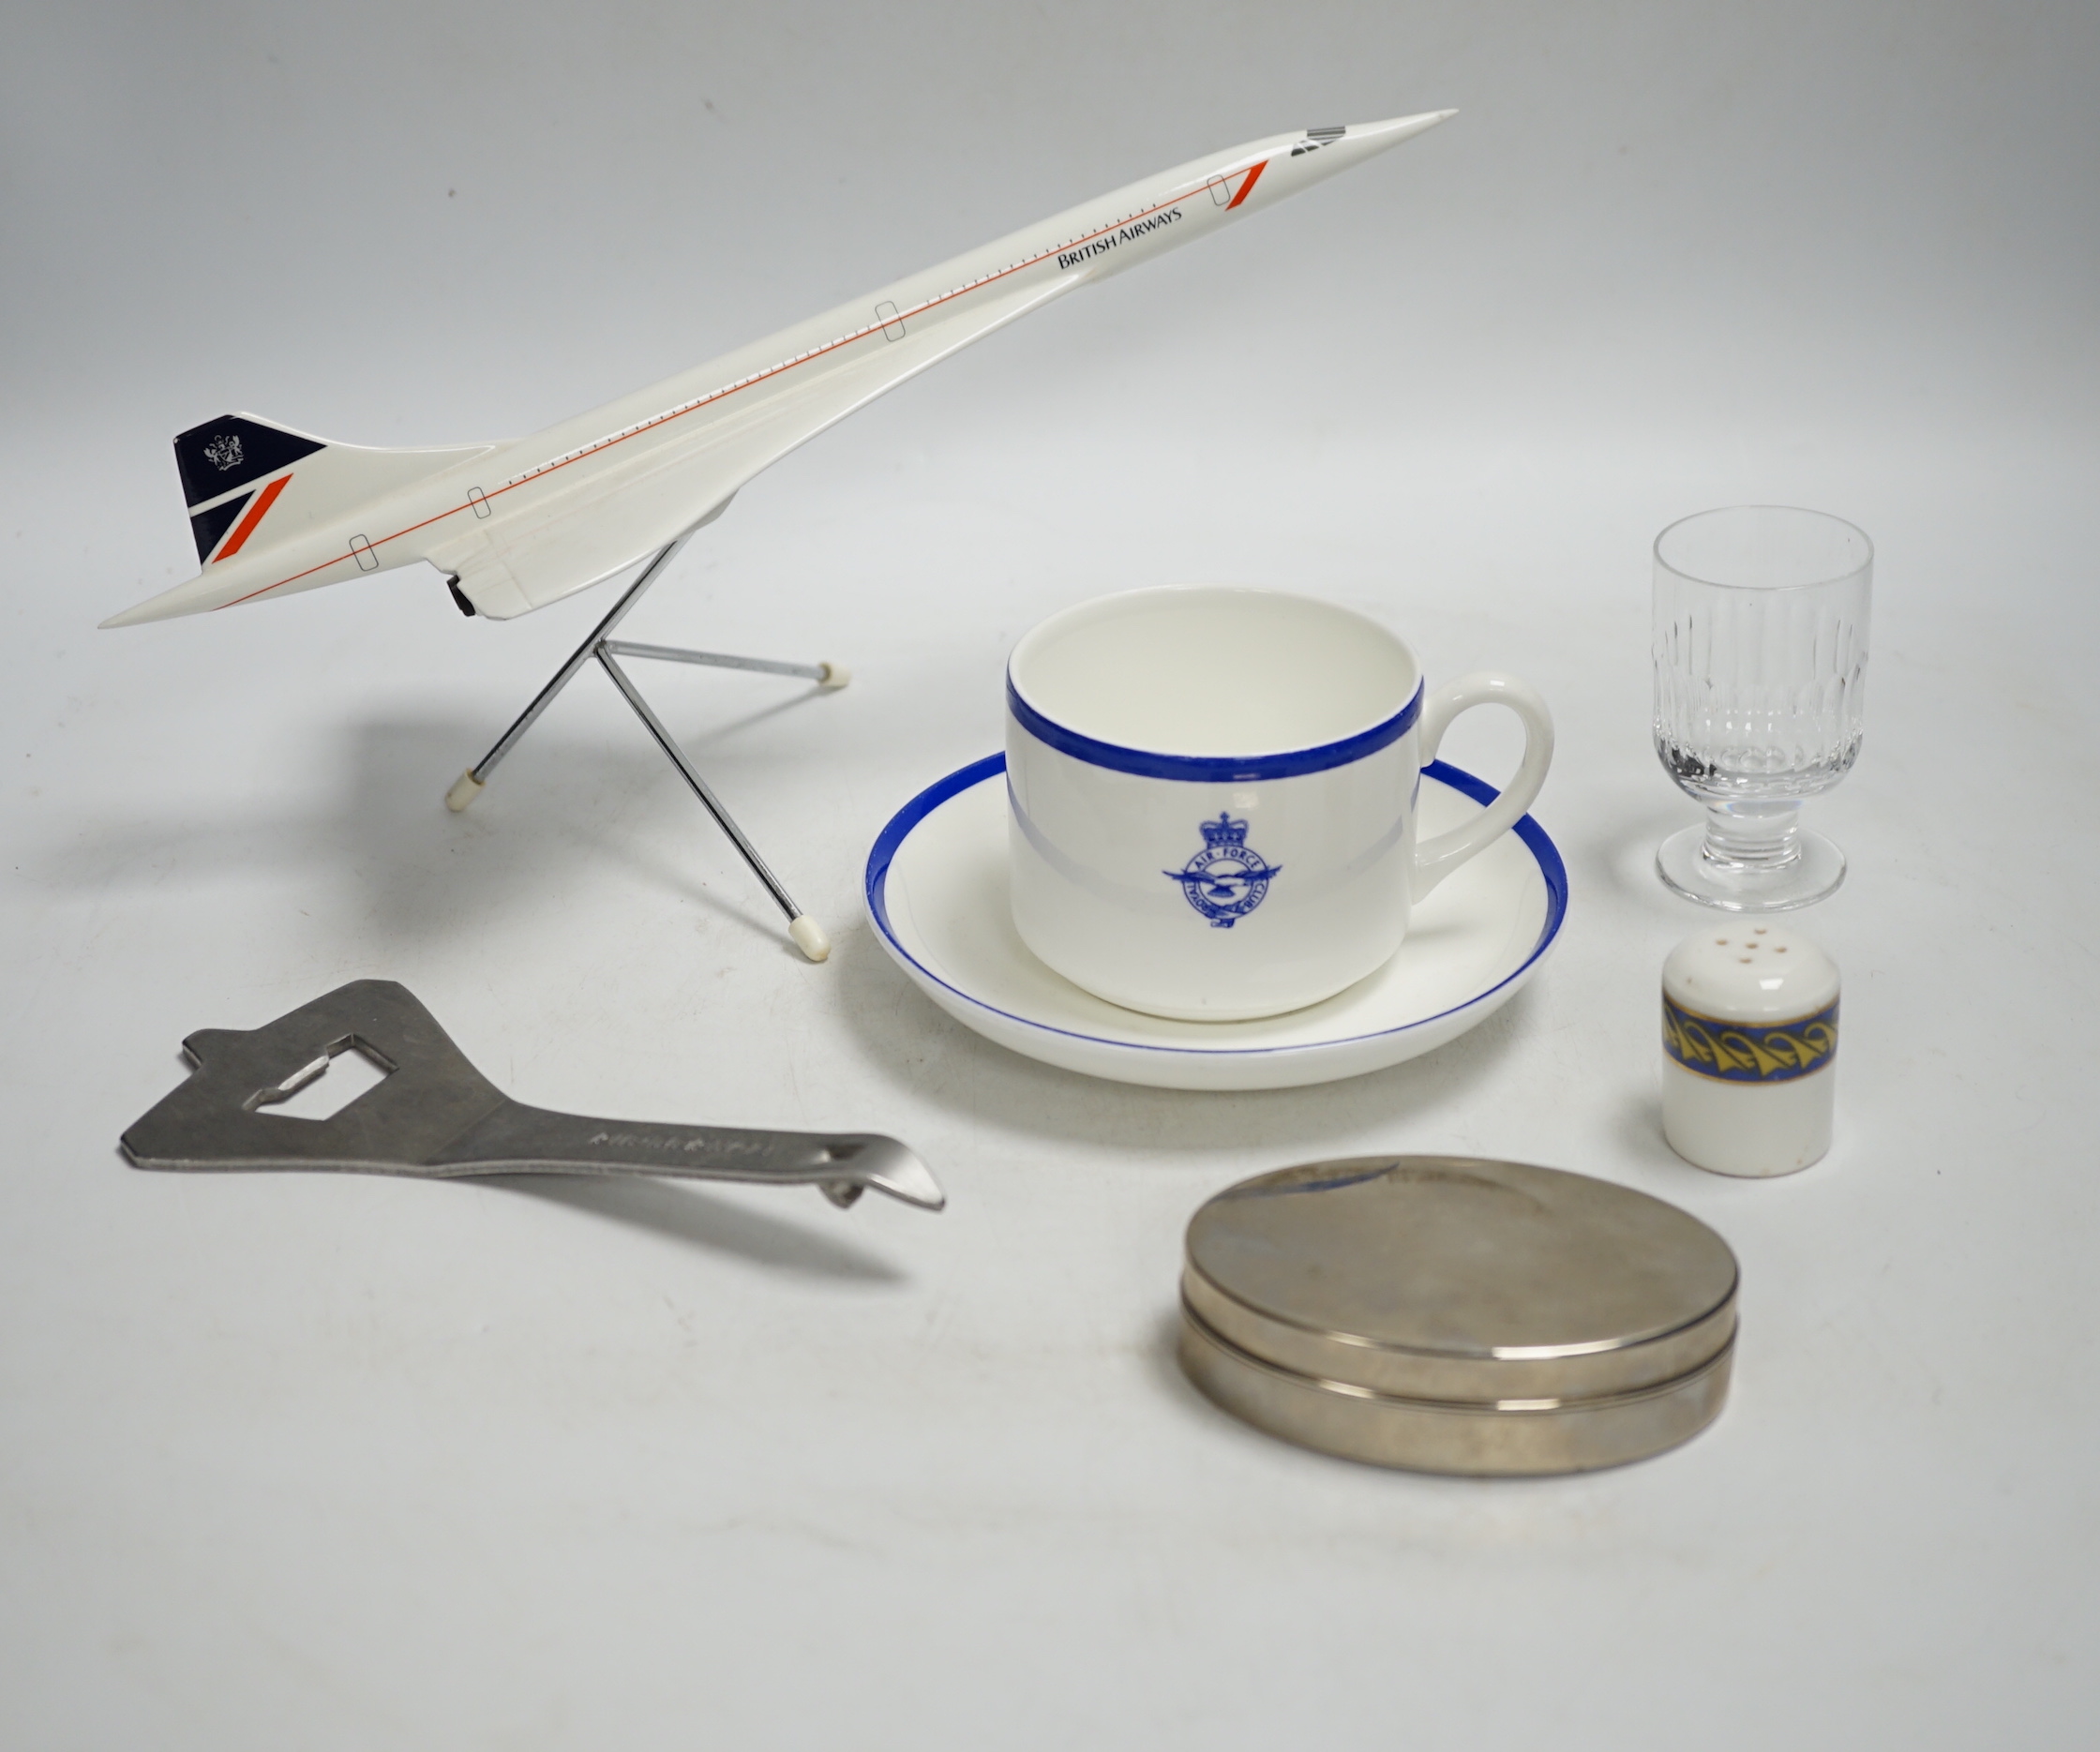 Concorde memorabilia comprising four British Airways glass tots, a pair of plated cased clothes brushes, three graduated scale models of Concorde and a bottle opener together with four Wedgwood Royal Air Force Club mugs